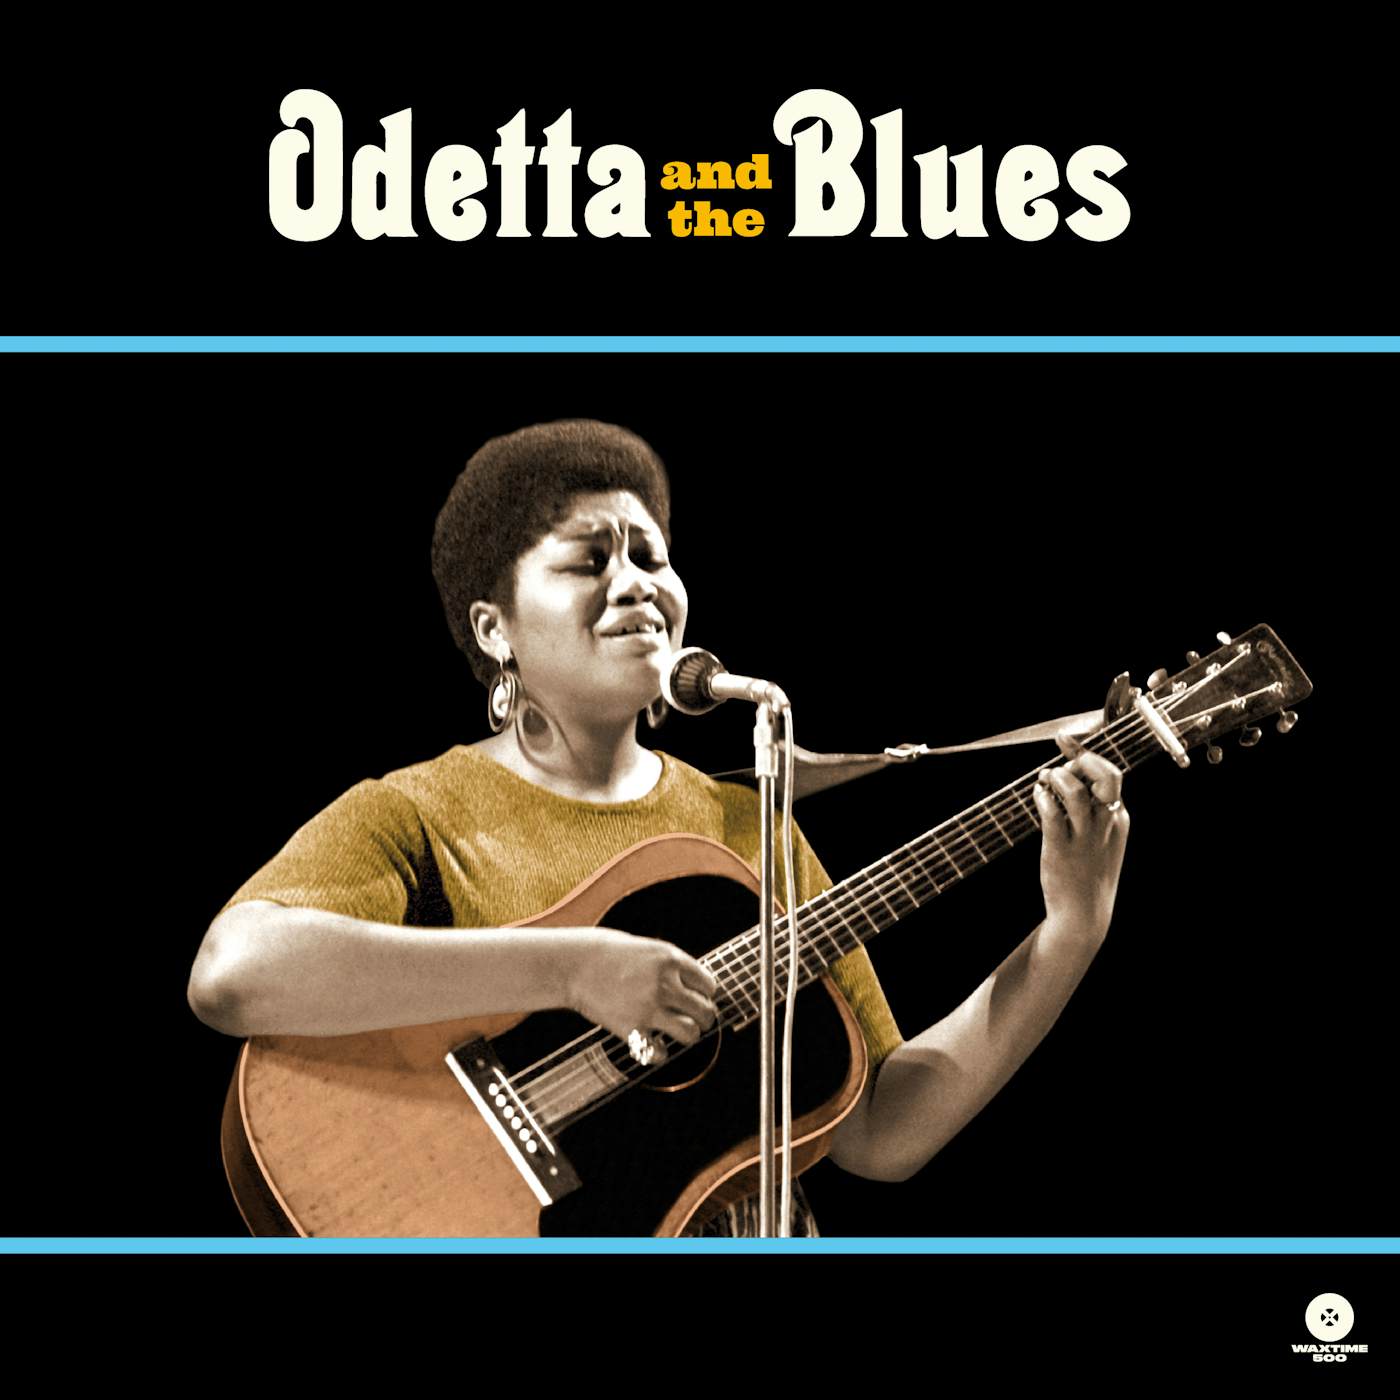 Odetta and the Blues Vinyl Record